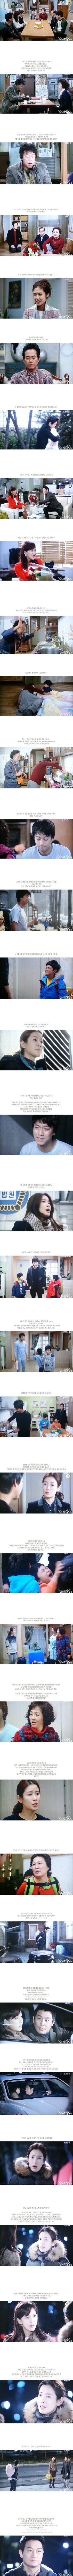 episodes 31 and 32 captures for the Korean drama 'The Wang Family'